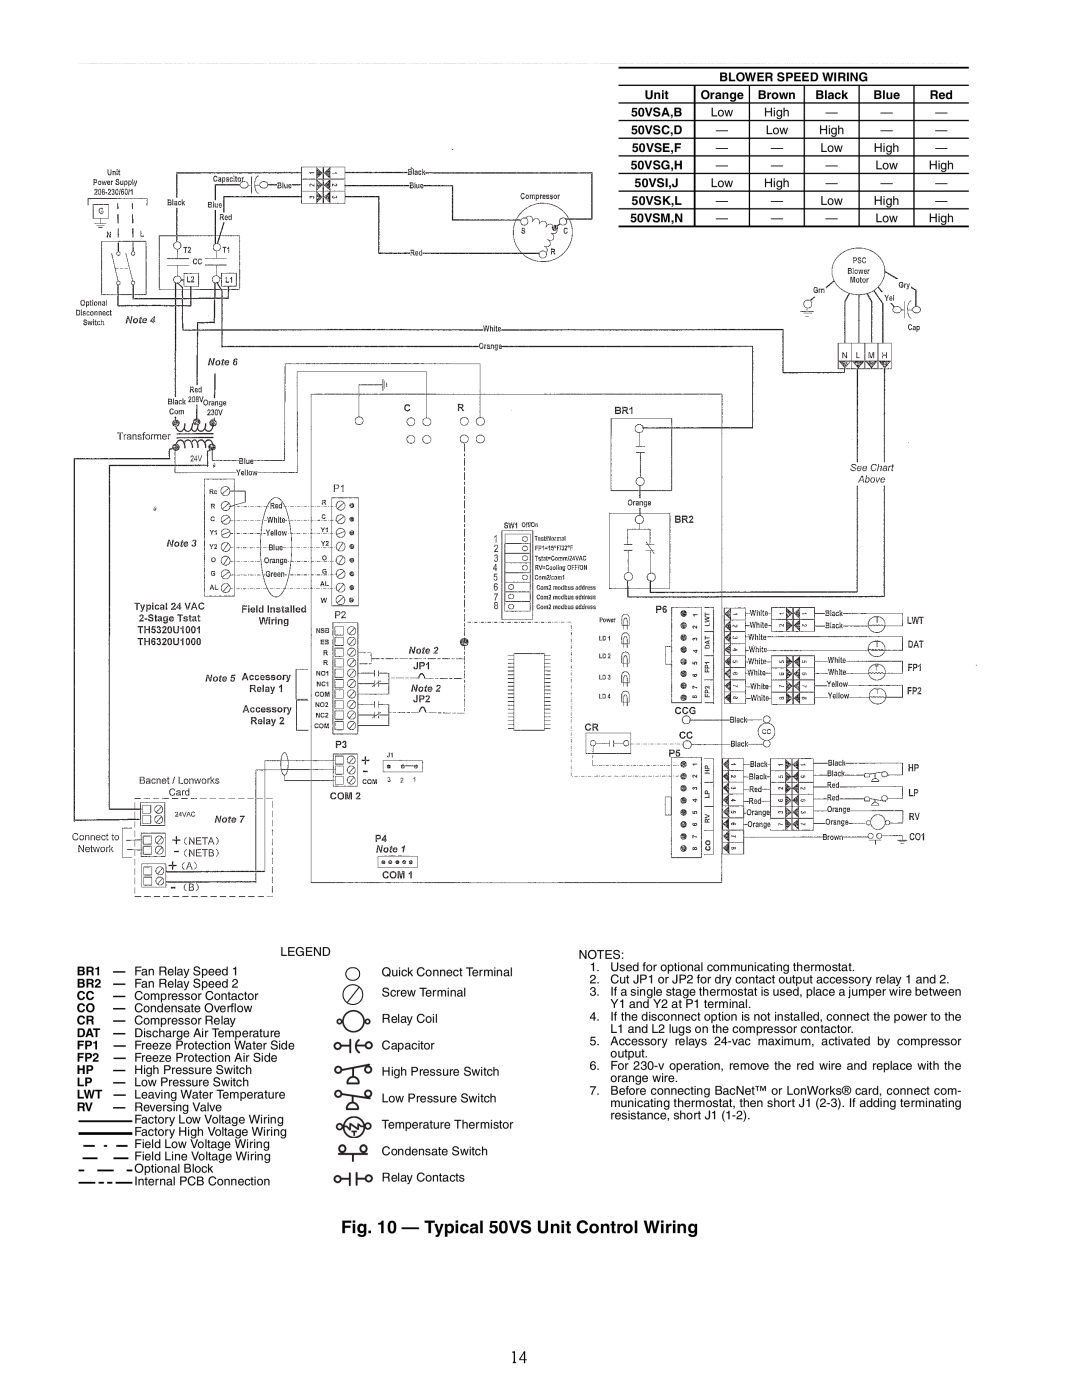 Carrier specifications a50-8352, Typical 50VS Unit Control Wiring 